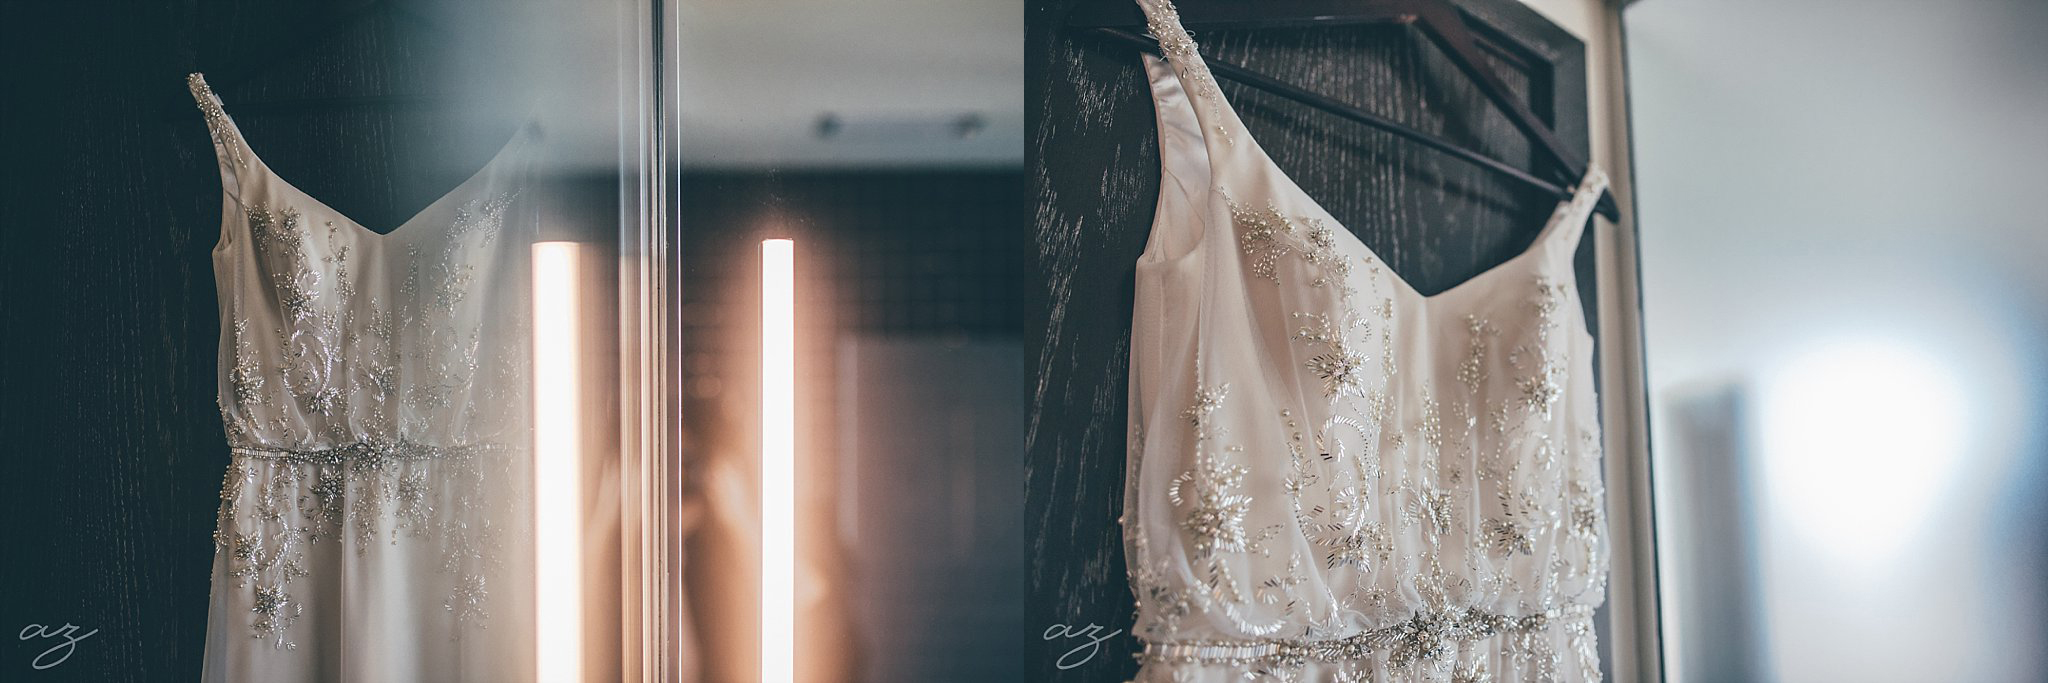 Wedding dress with silver crystals at the Joule Hotel